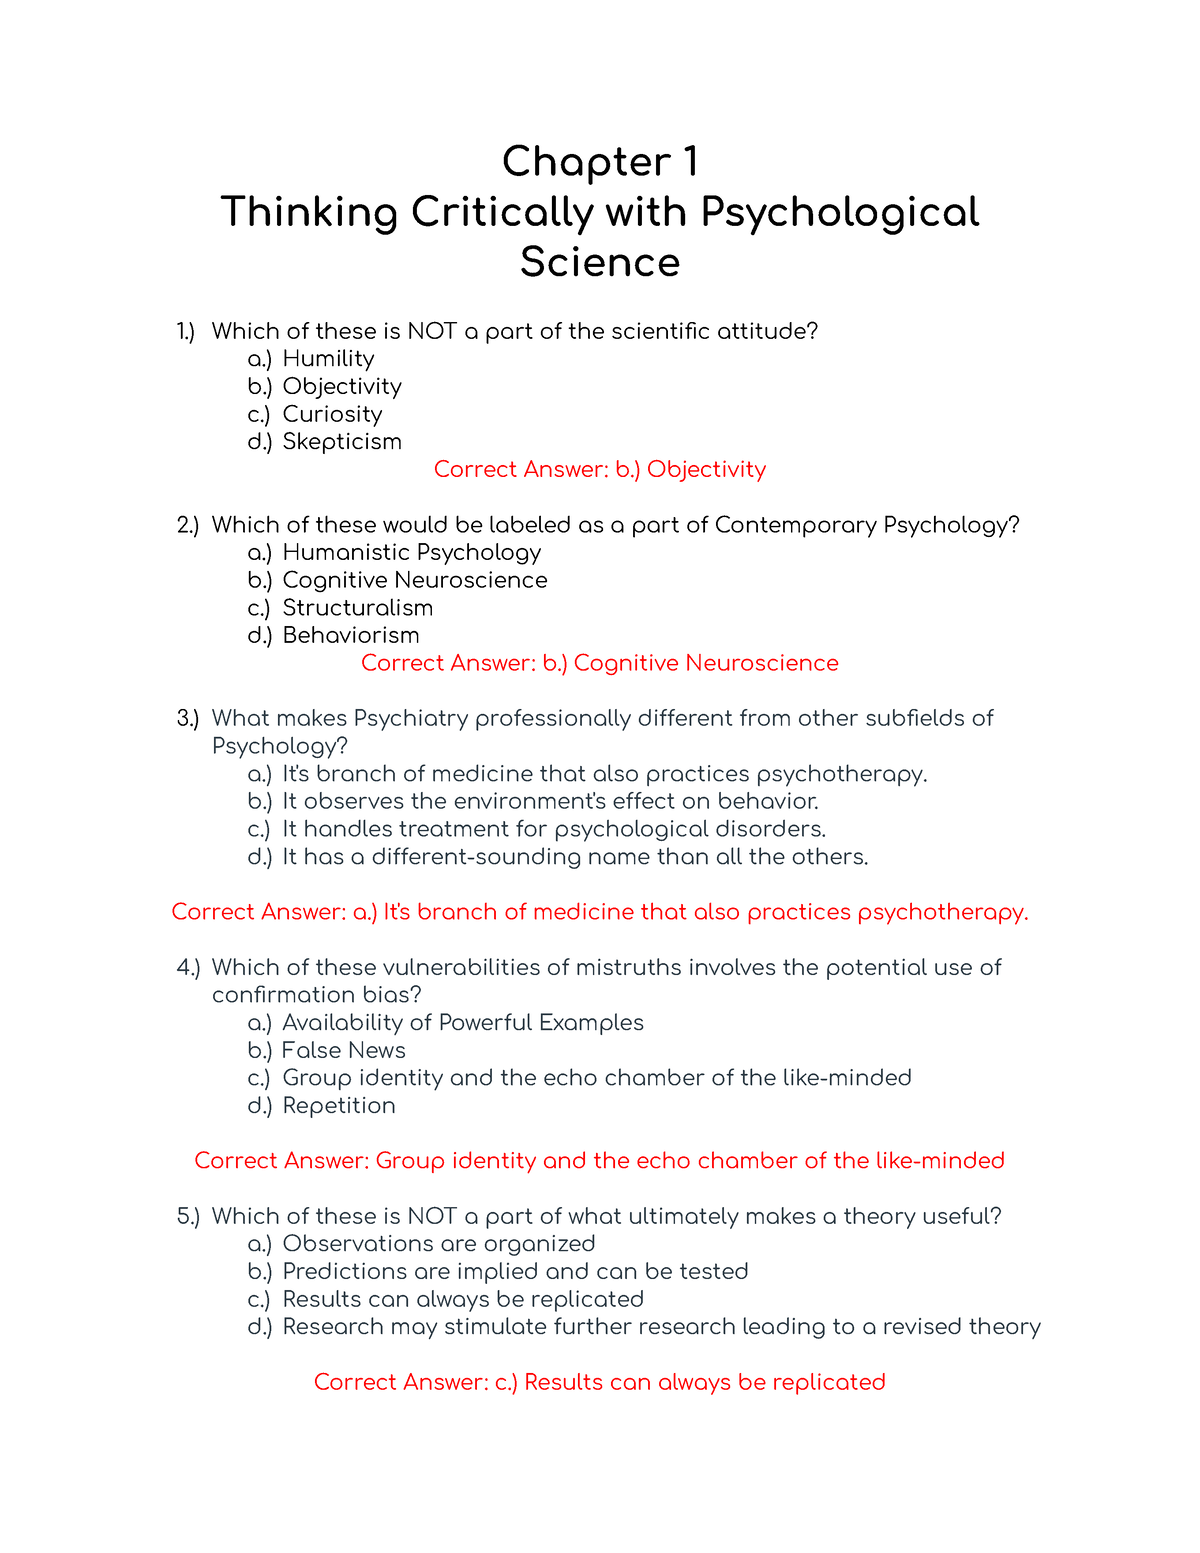 assignment module 1 think critically quiz